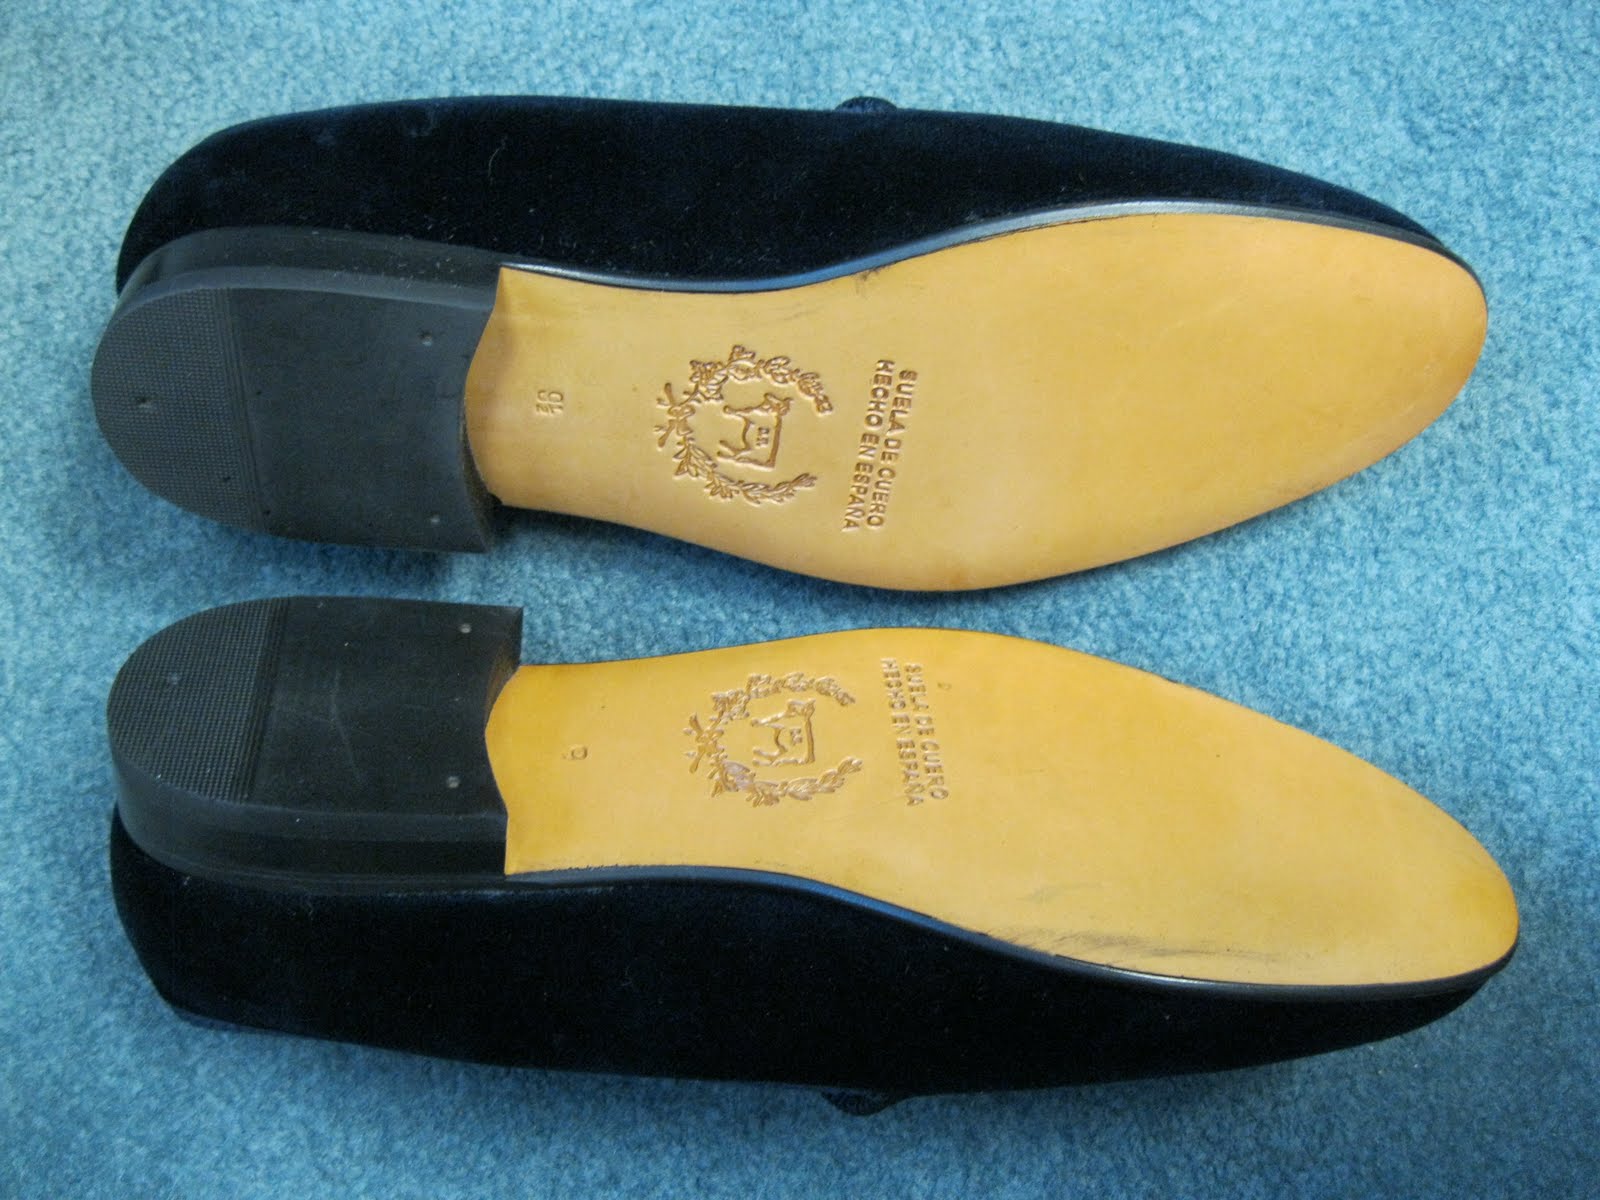 Life, Liberty, and the Pursuit of Elegance: Velvet Slippers vs Patent ...